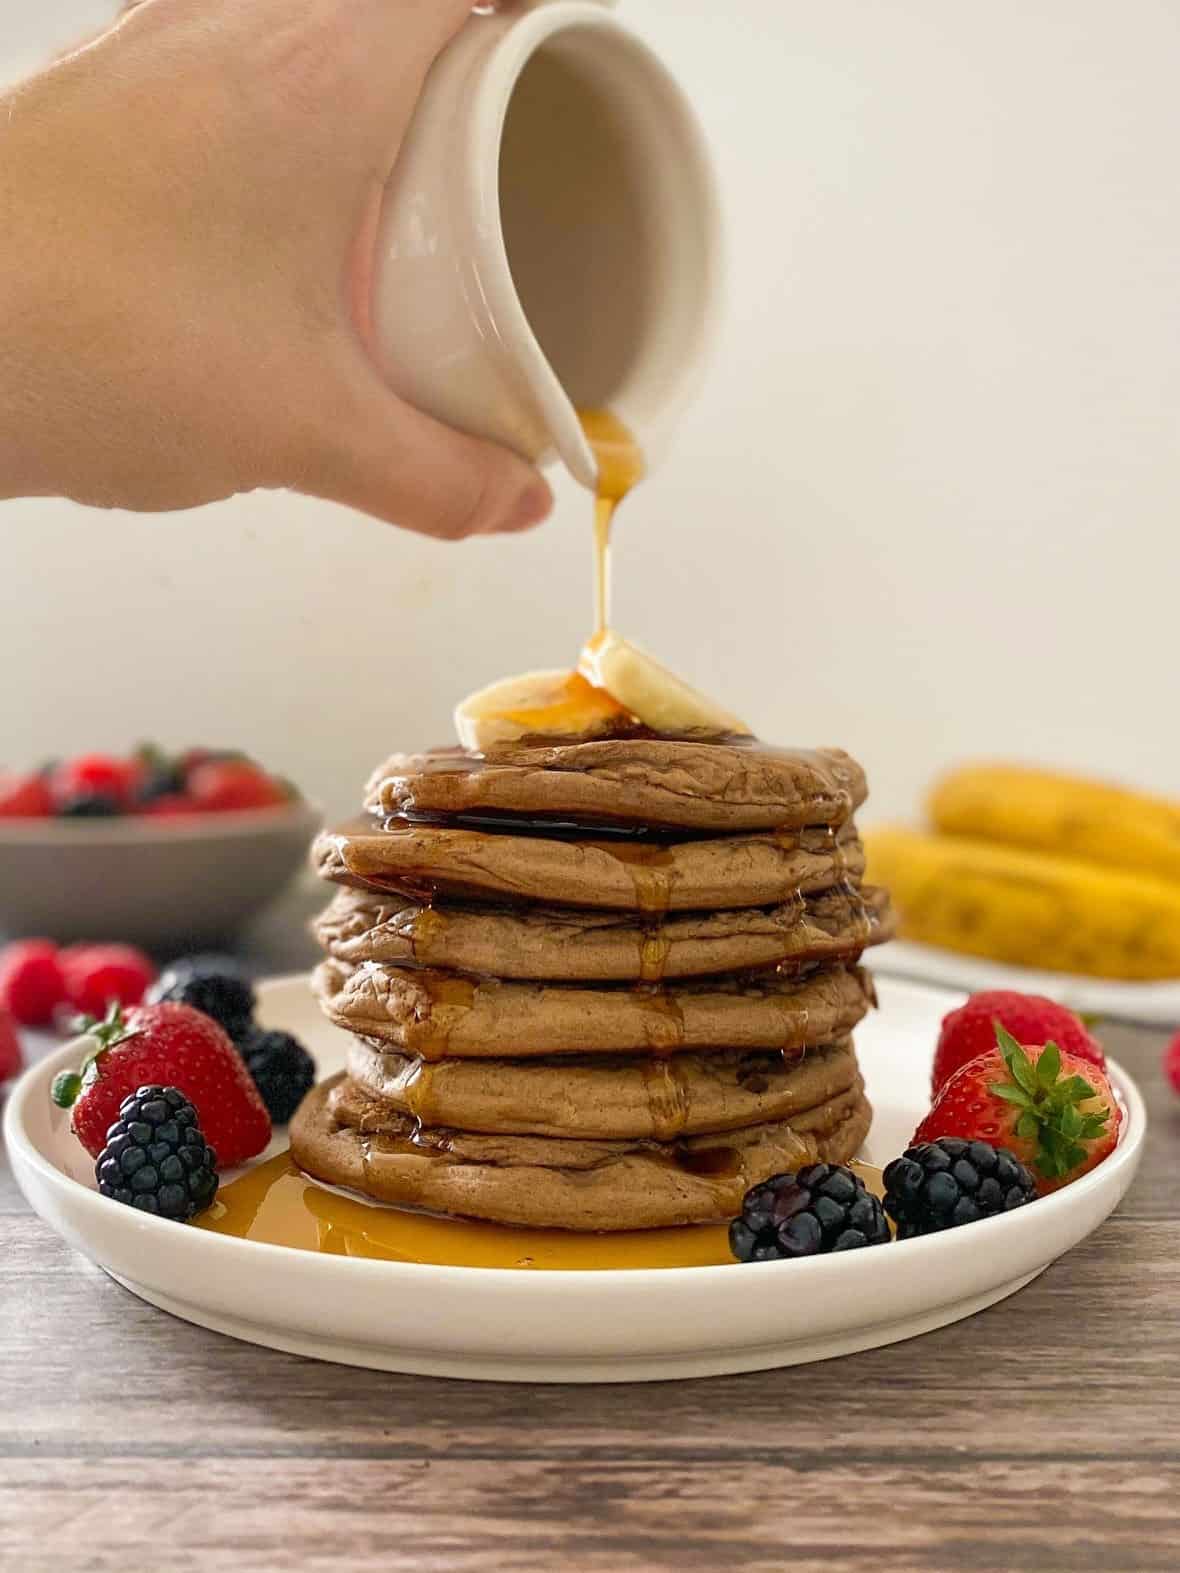 Syrup being poured over stack of pancakes with banana slices on top.